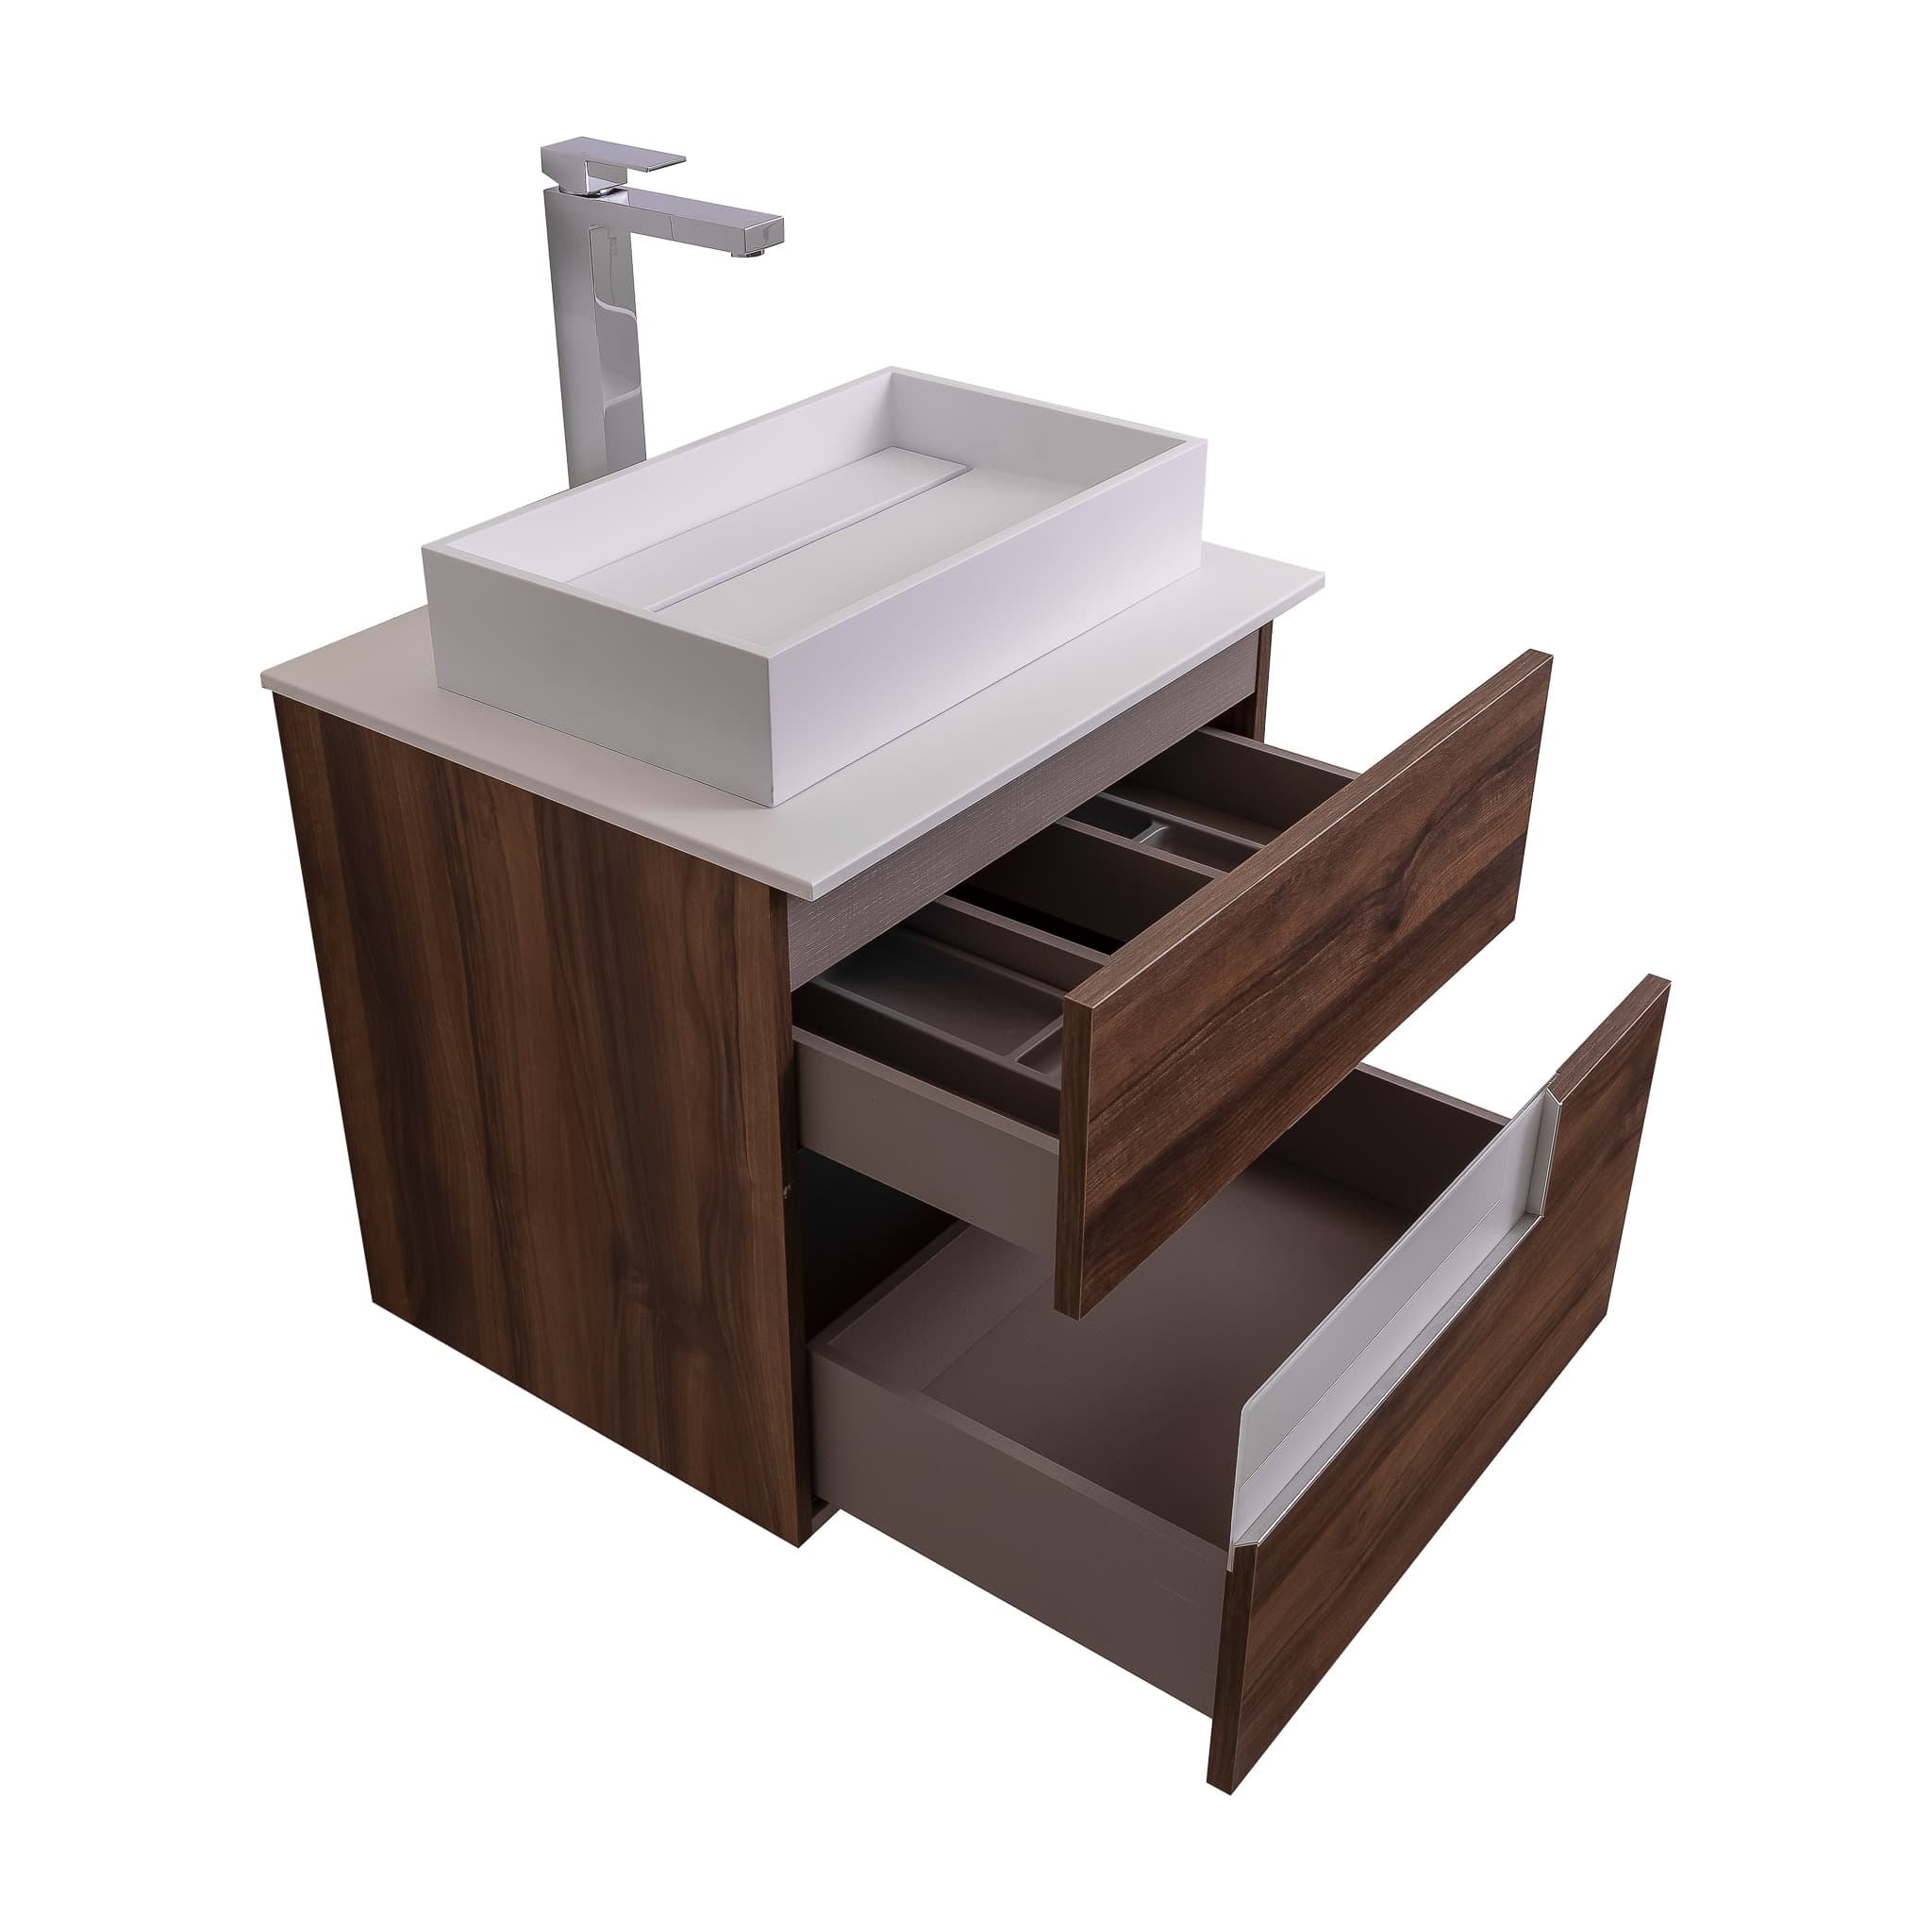 Vision 23.5 Valenti Medium Brown Wood Cabinet, Solid Surface Flat White Counter And Infinity Square Solid Surface White Basin 1329, Wall Mounted Modern Vanity Set